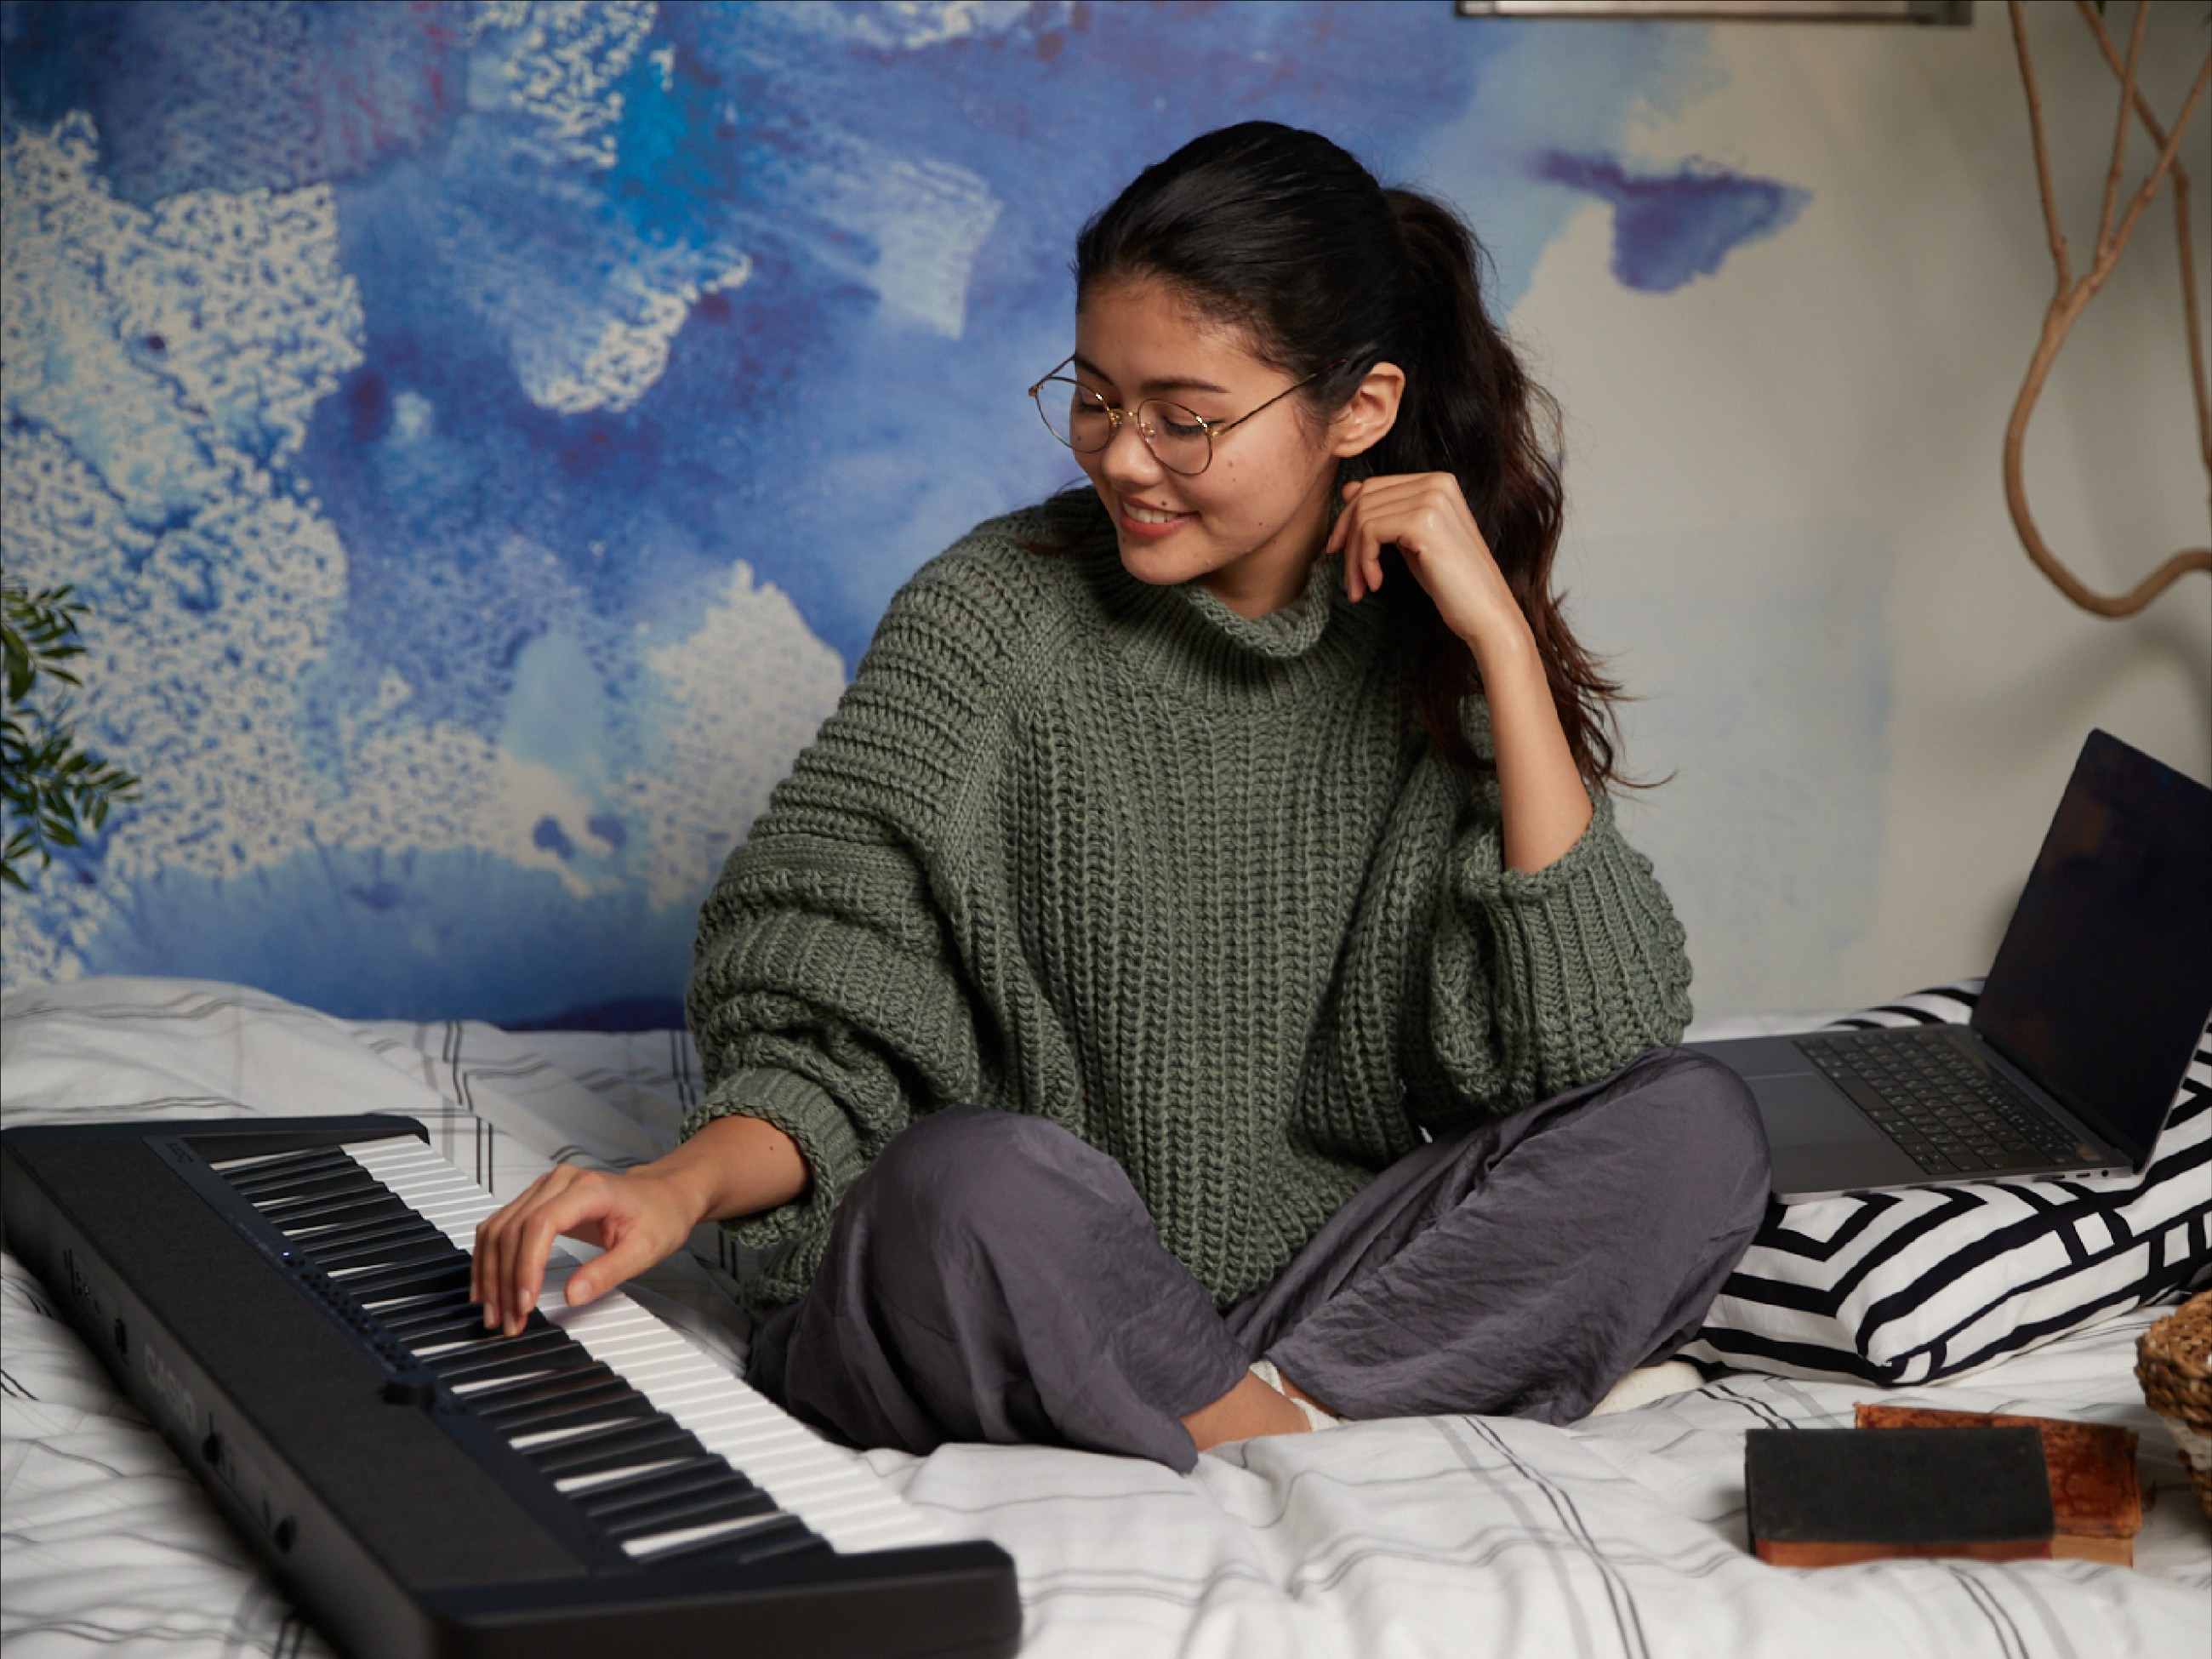 All three Casiotone keyboards can be powered by the included AC adapter or six AA batteries, allowing users to make music anywhere.